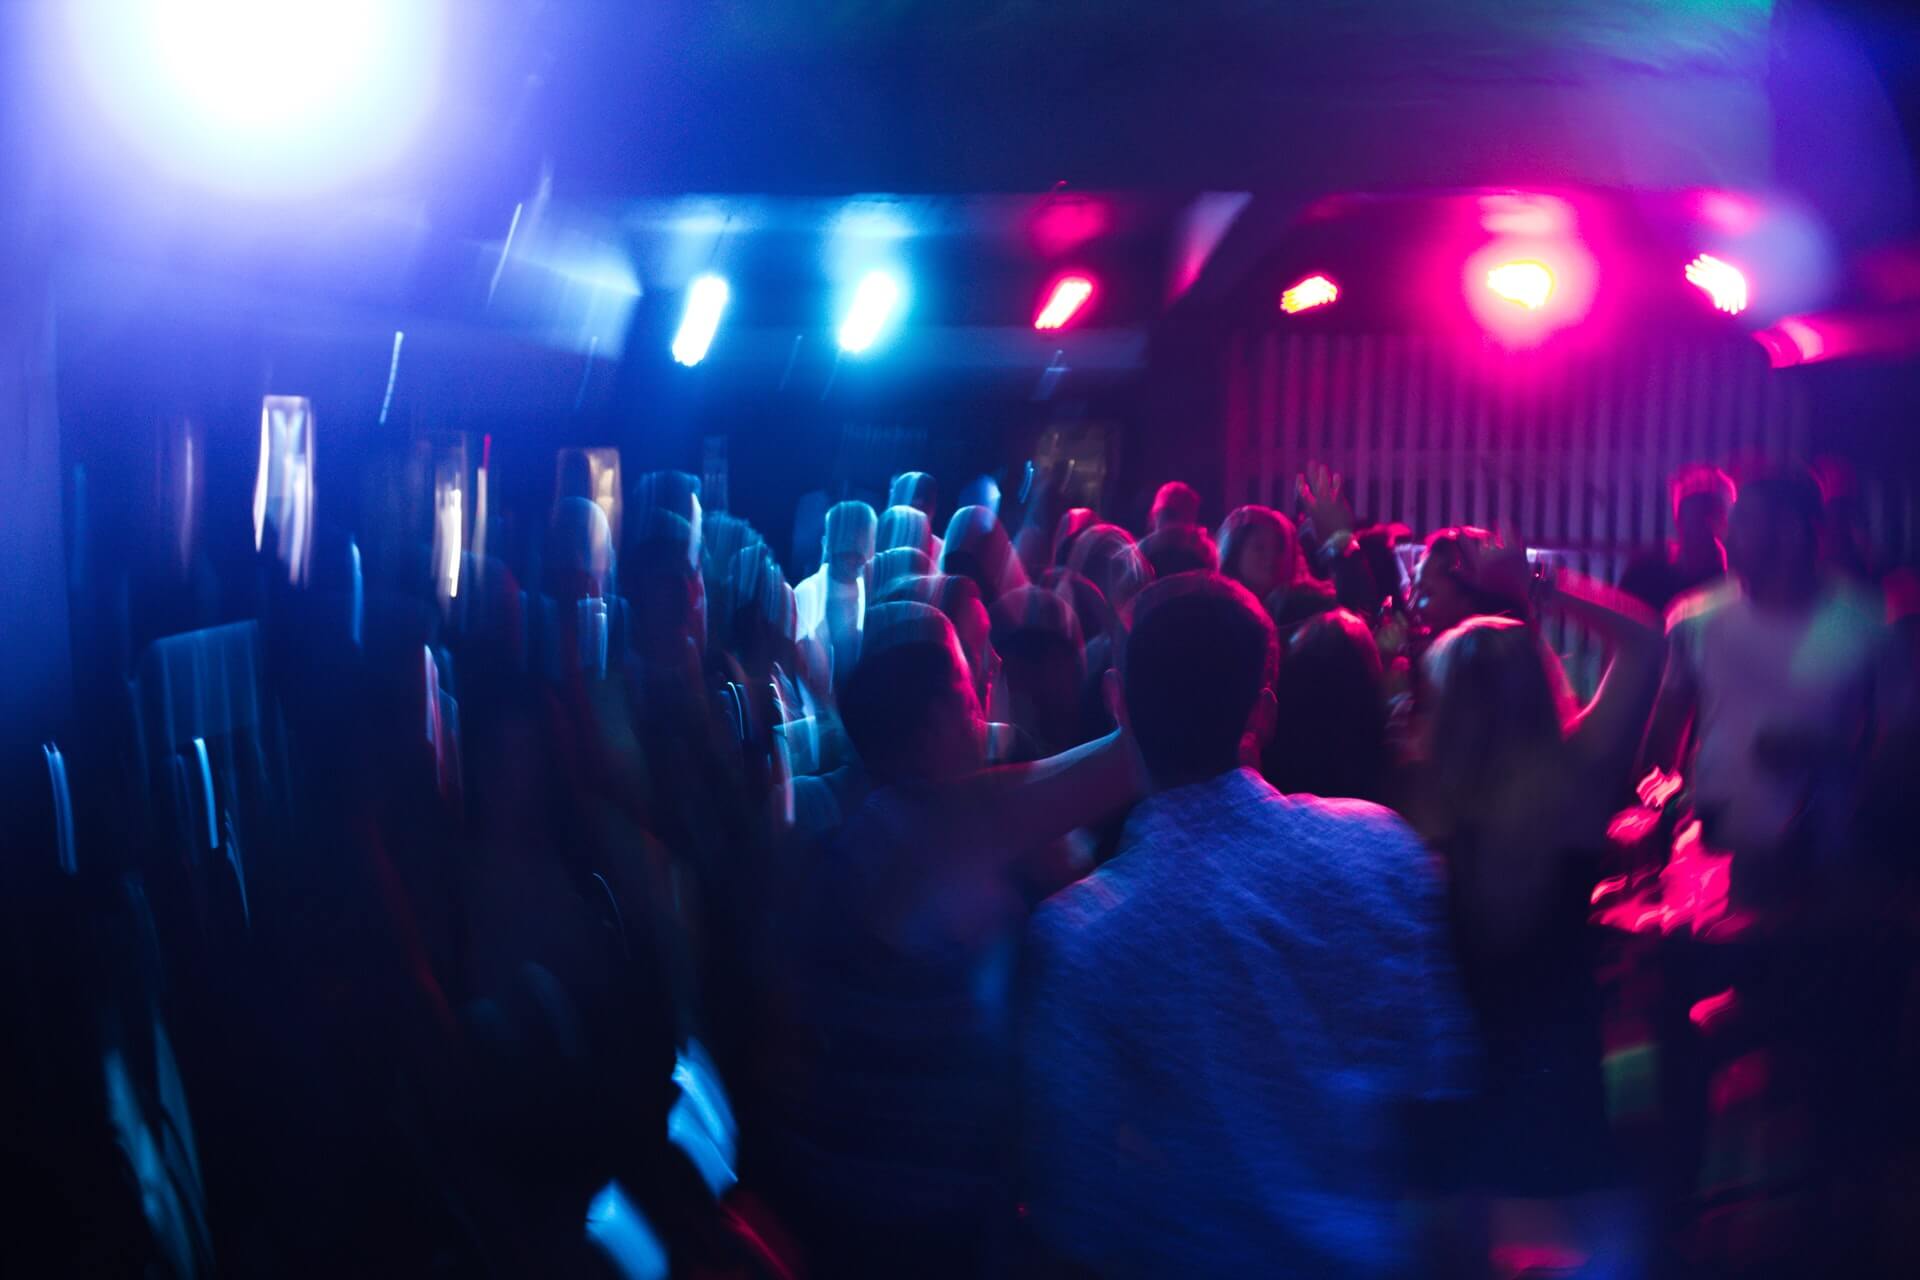 Blurry image of people in a nightclub or bar